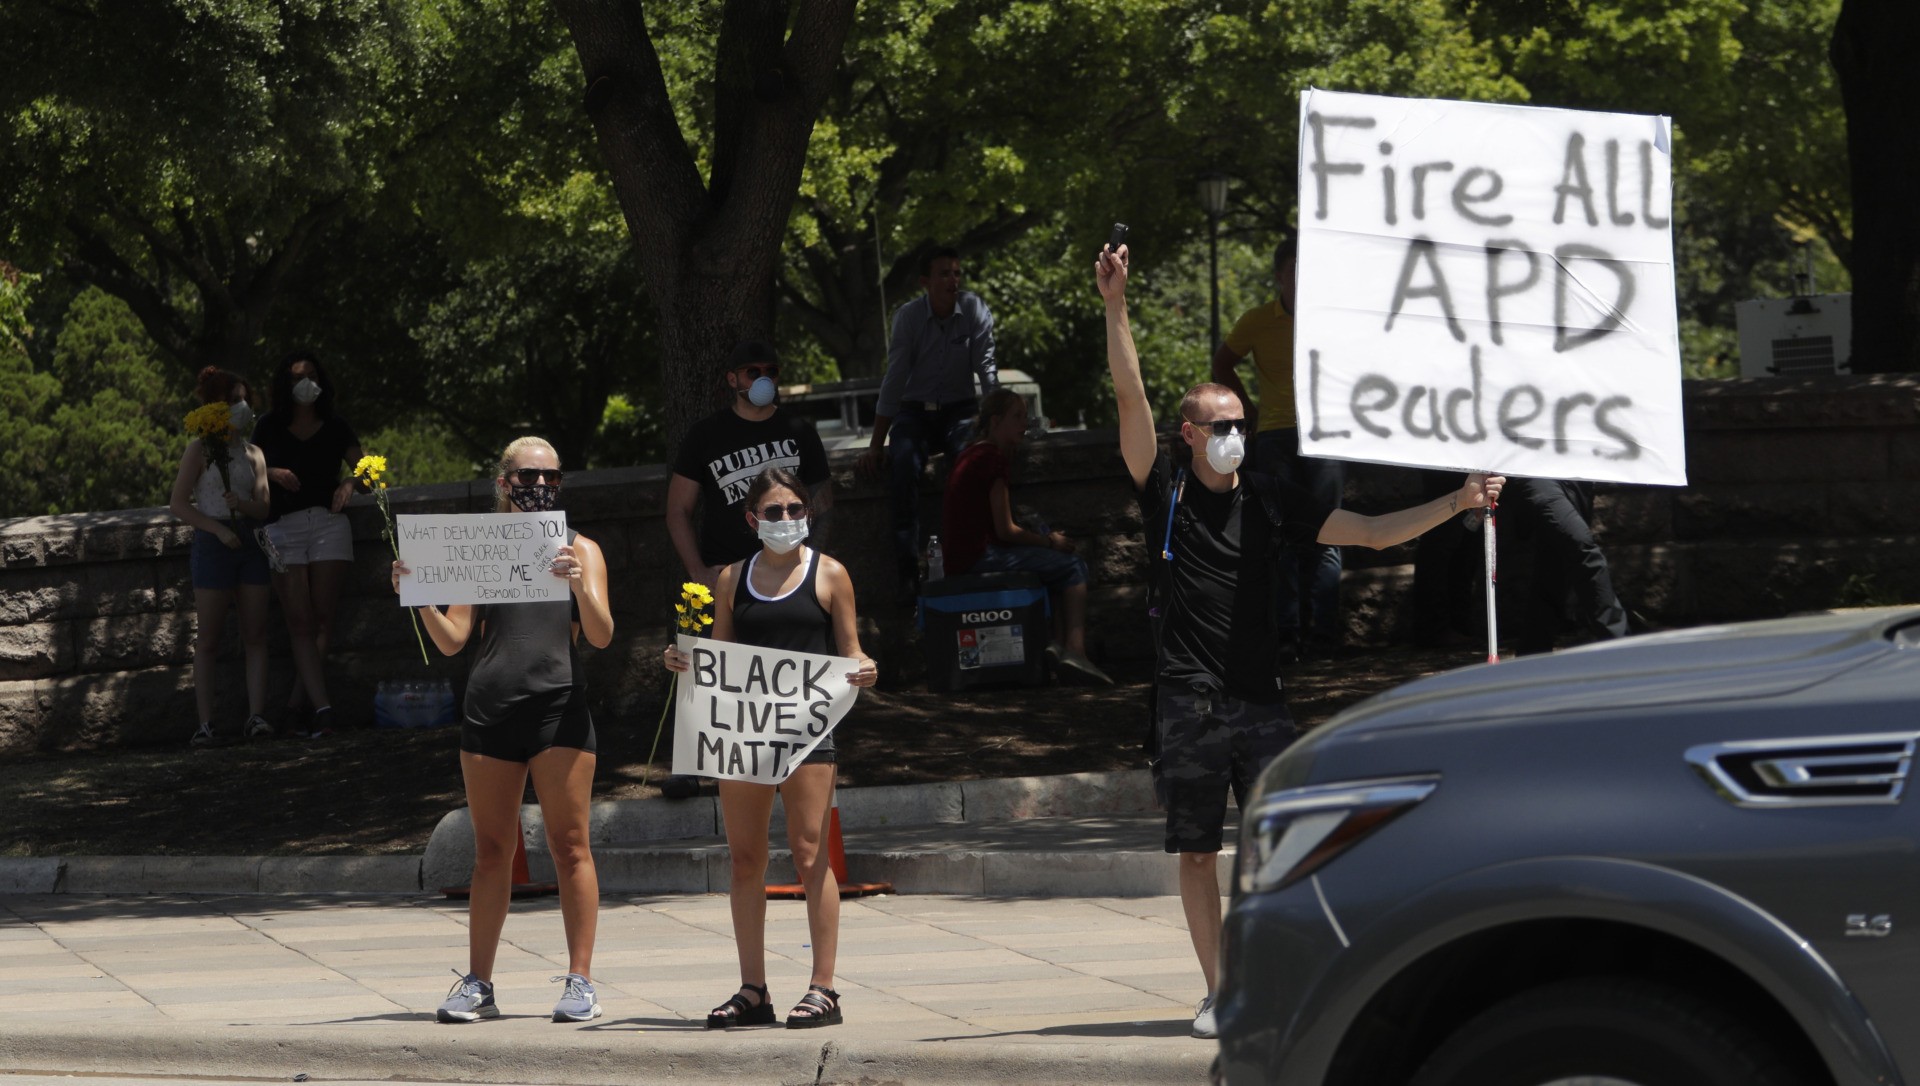 Demonstrators gather near the state Capitol in Austin, Texas, Saturday, June 6, 2020, to protest the death of George Floyd, a black man who was in police custody in Minneapolis. Floyd died after being restrained by Minneapolis police officers on Memorial Day.(AP Photo/Eric Gay)